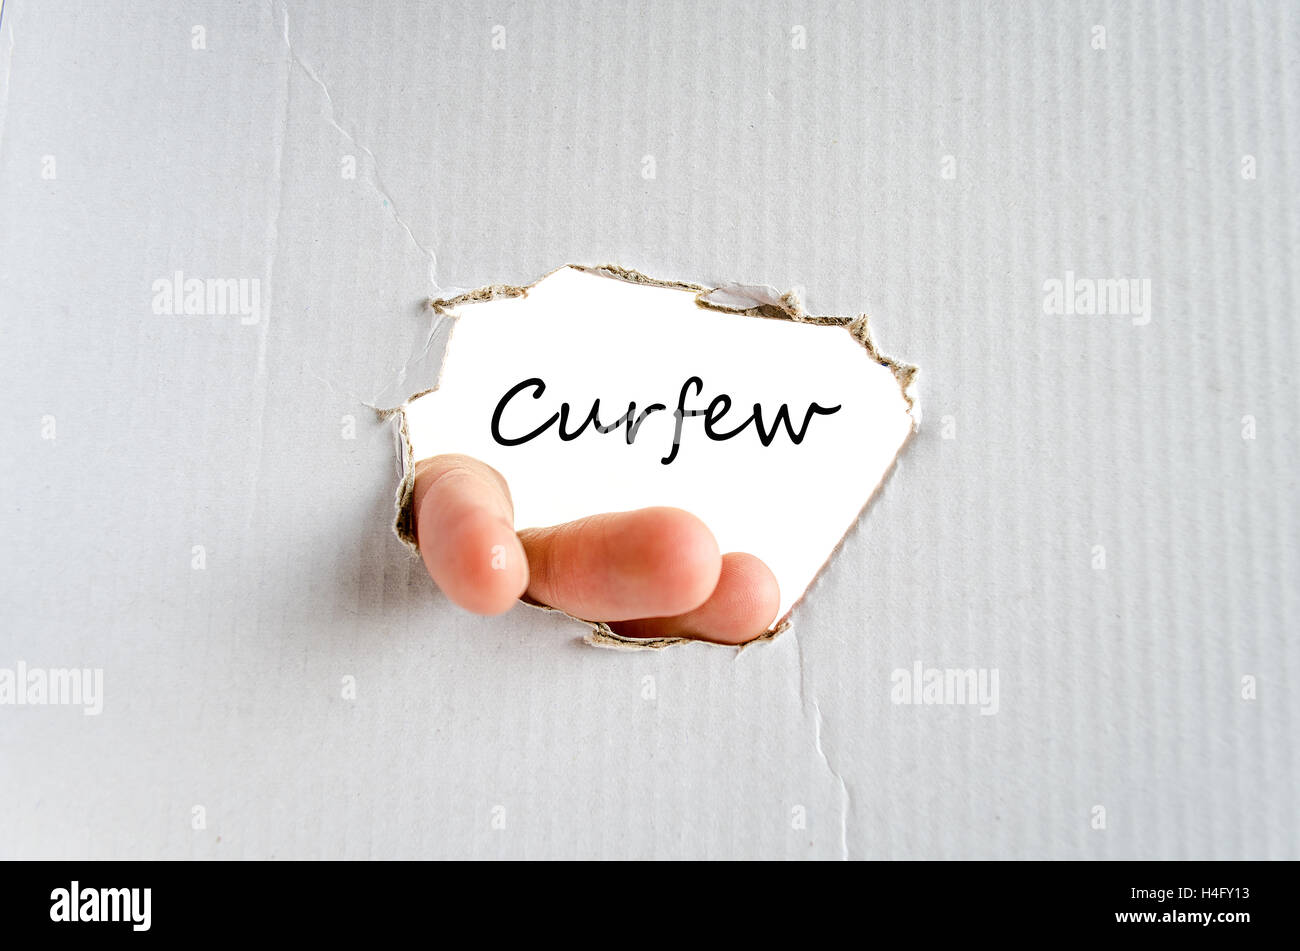 Curfew text concept isolated over white background Stock Photo